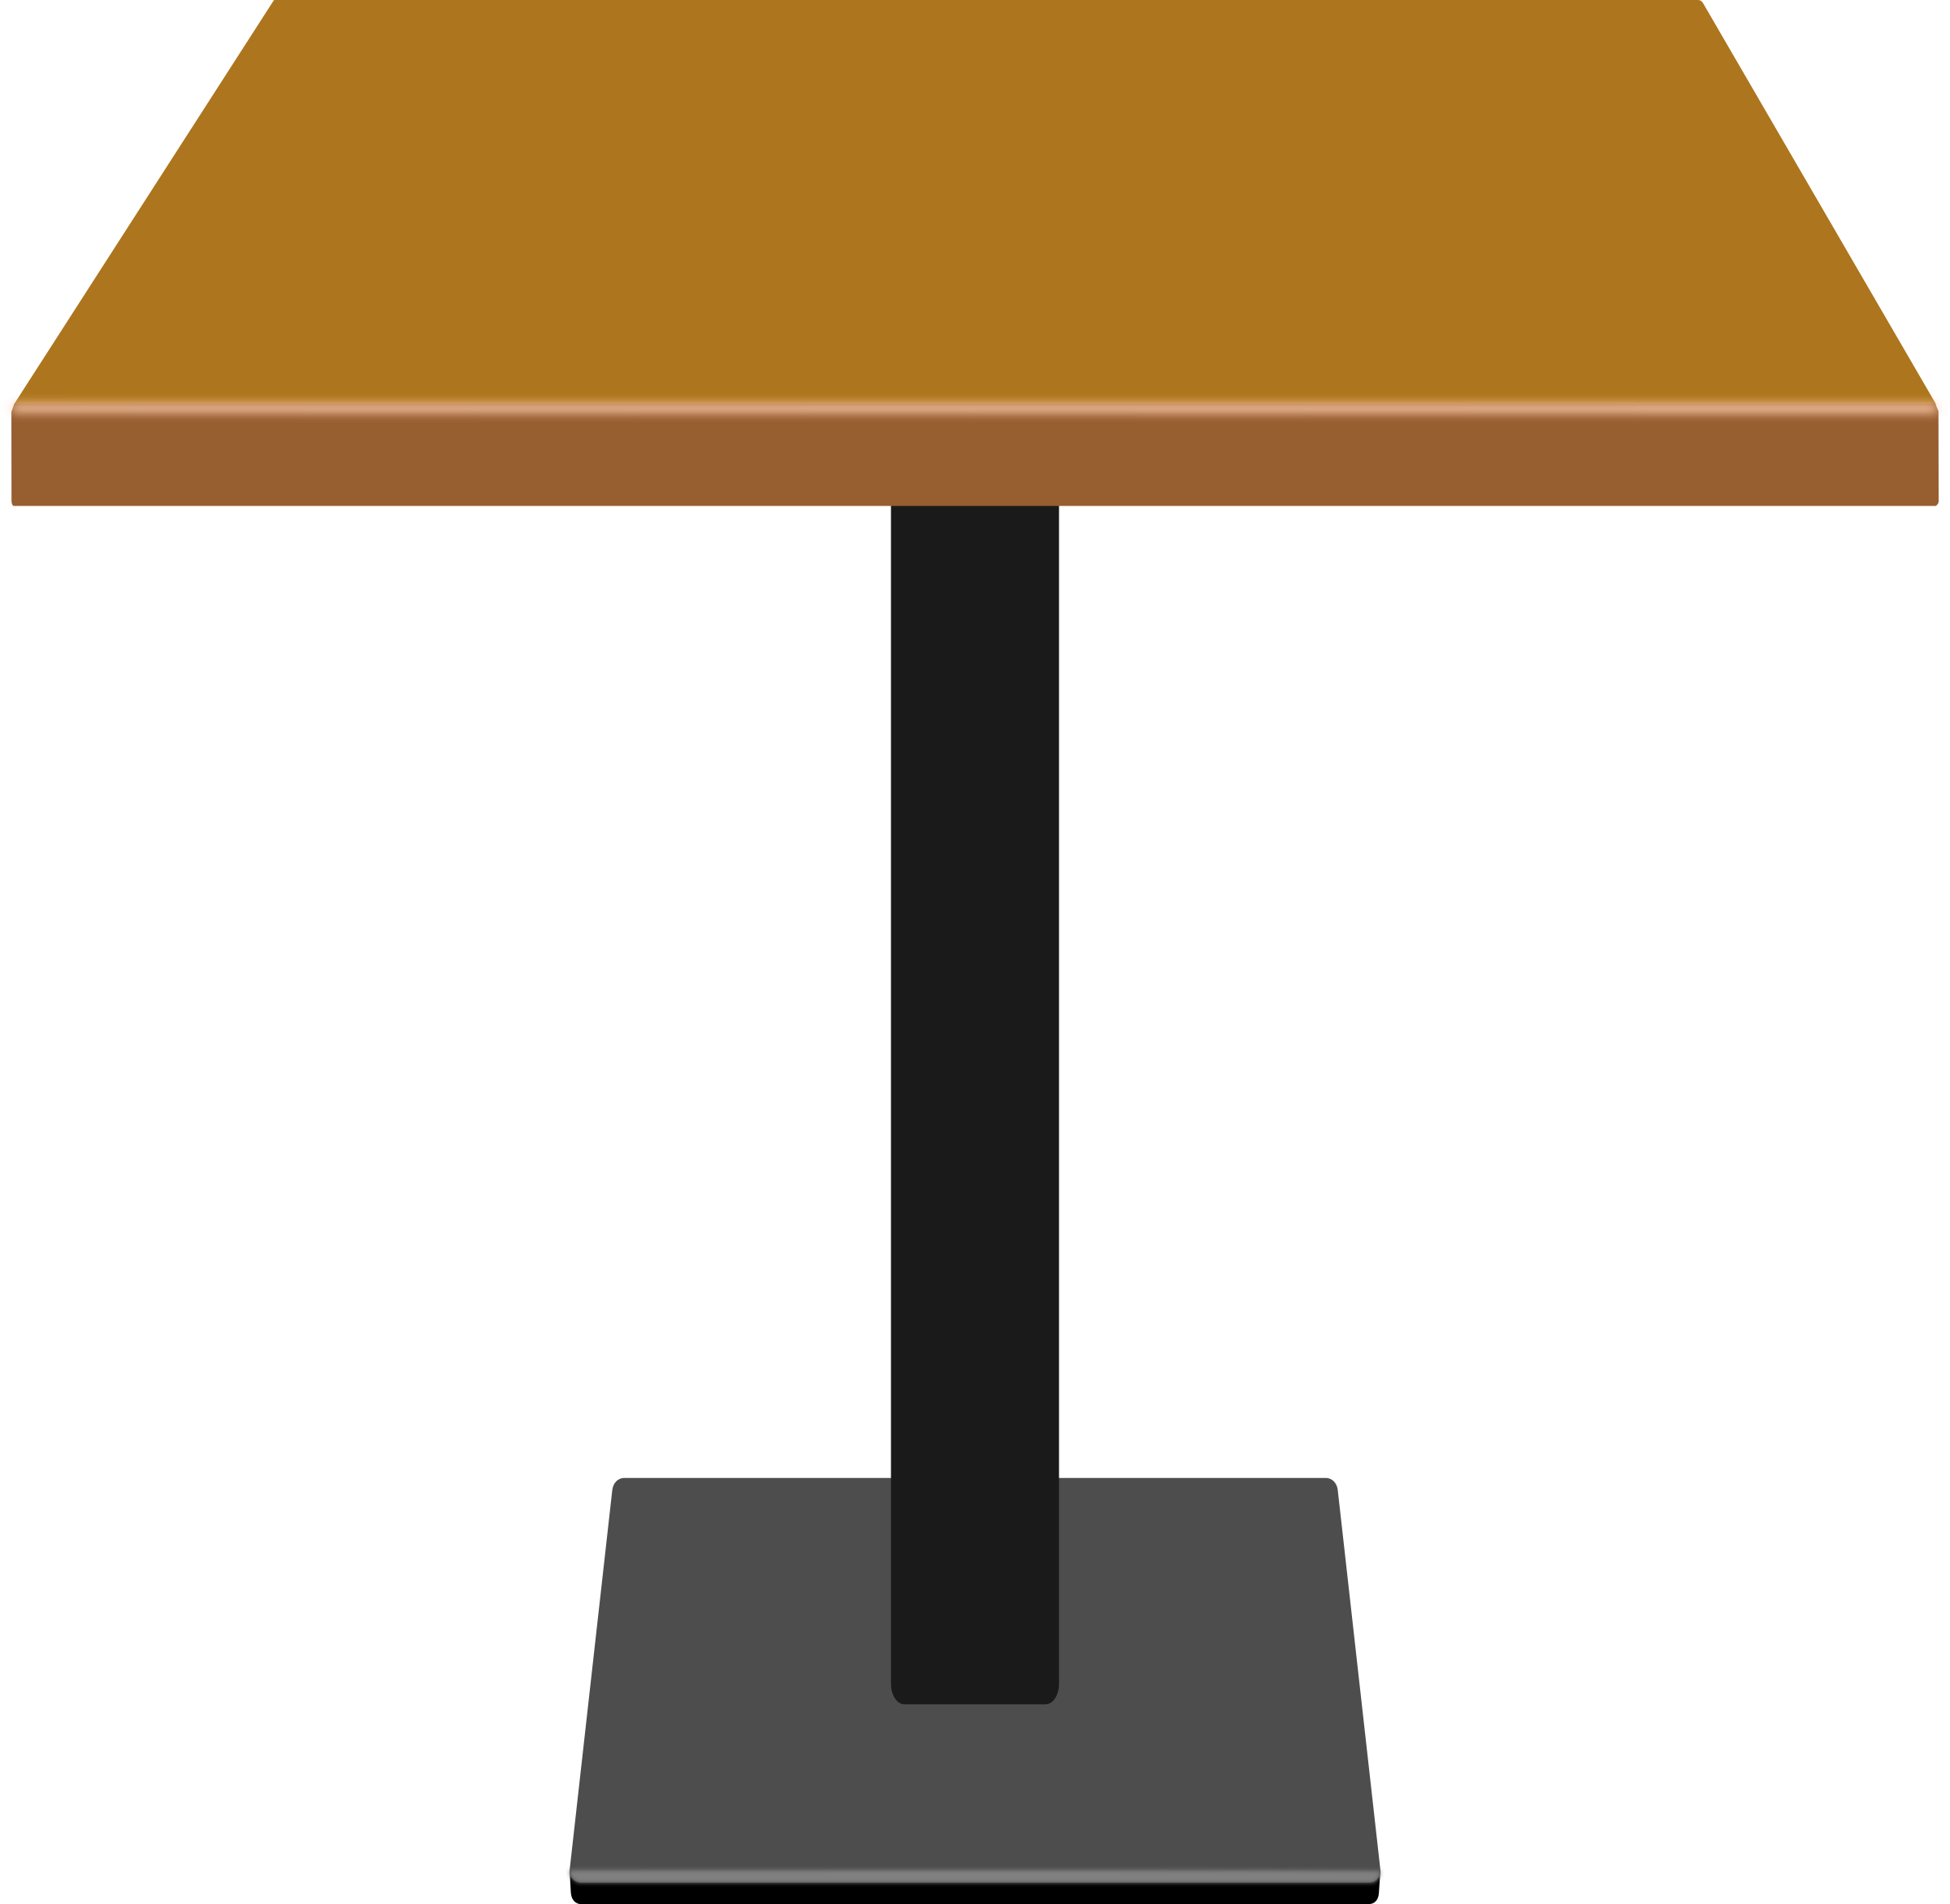 Big Image - Table Vector Png (2400x2343)